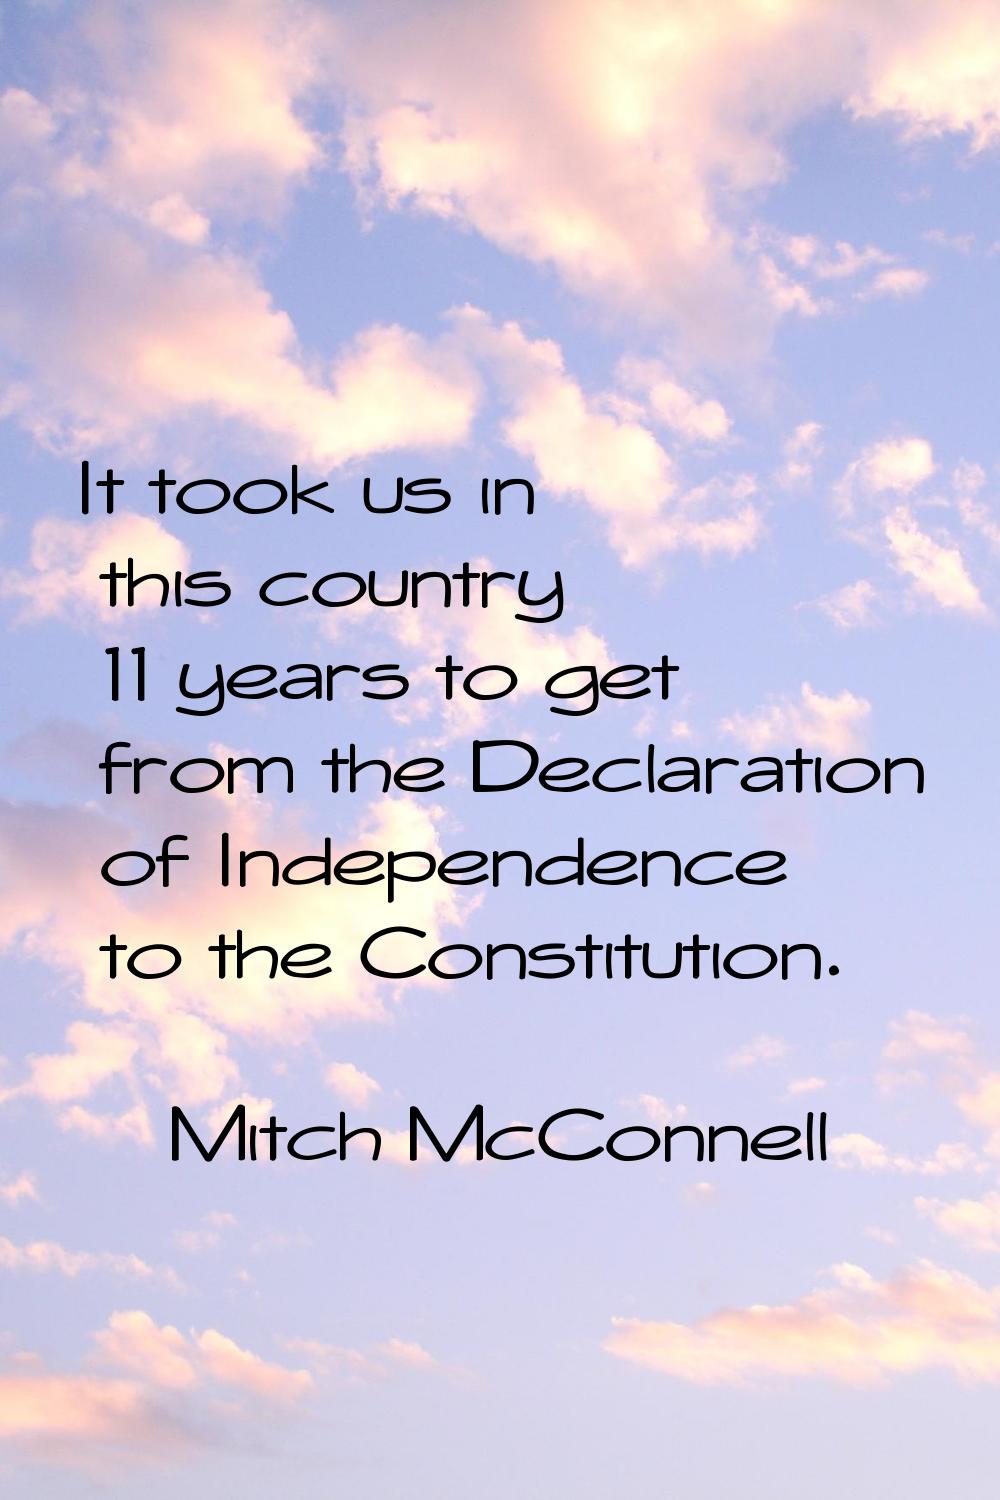 It took us in this country 11 years to get from the Declaration of Independence to the Constitution